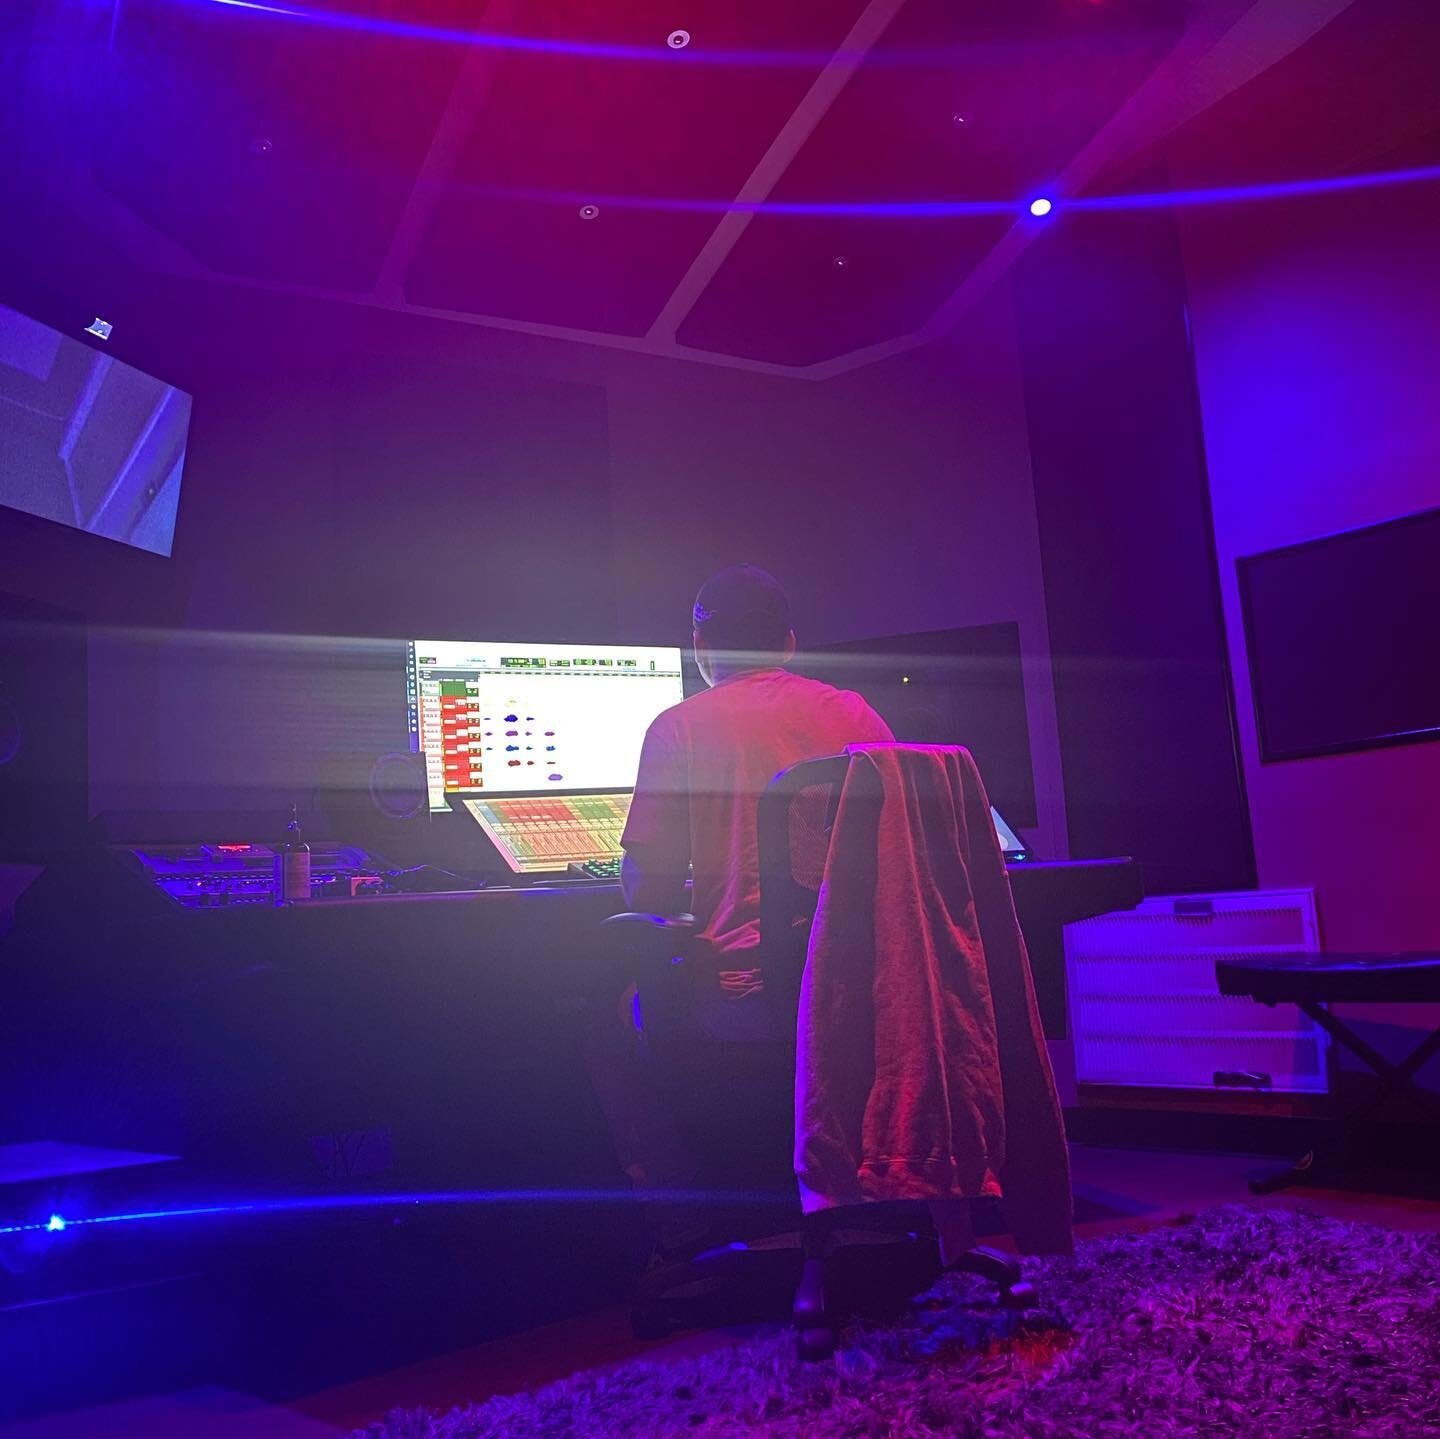 Record. Mix. Master. Our engineers have been supporting Houston&rsquo;s next wave since 2005. What&rsquo;s happening in 2021? #houston #recordingstudio #audioengineer